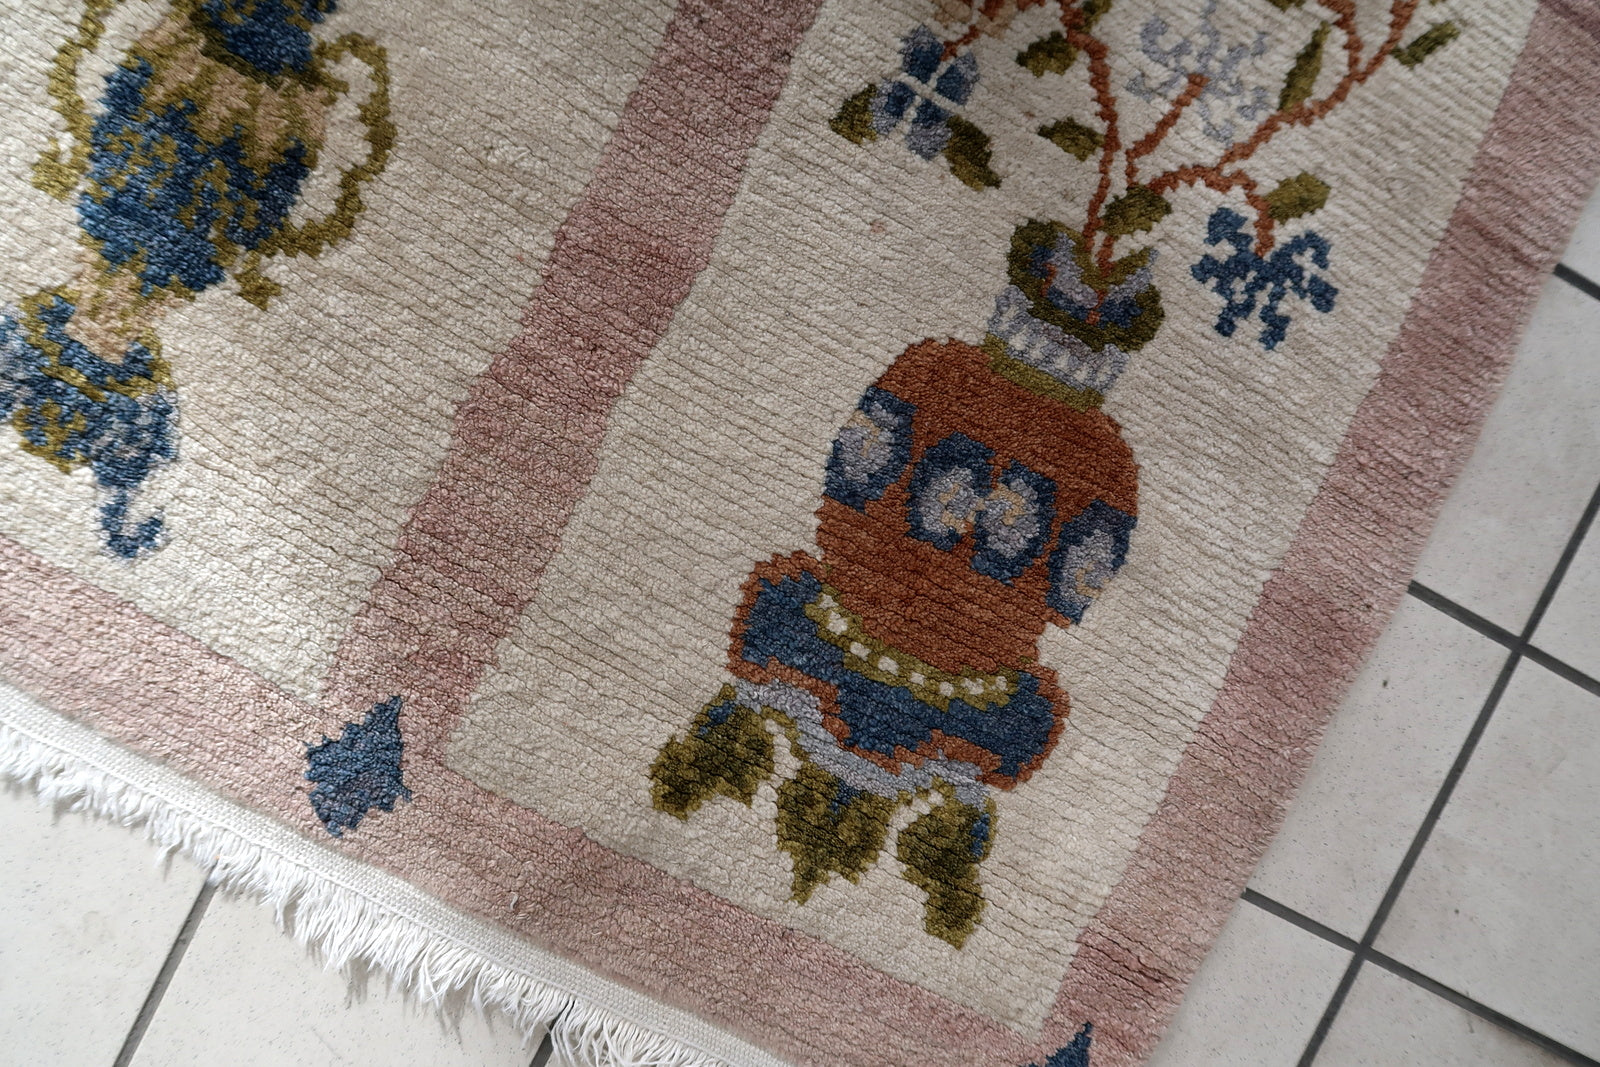 Soft Feel Underfoot Provided by Wool Material on Handmade Vintage Rug - 1970s